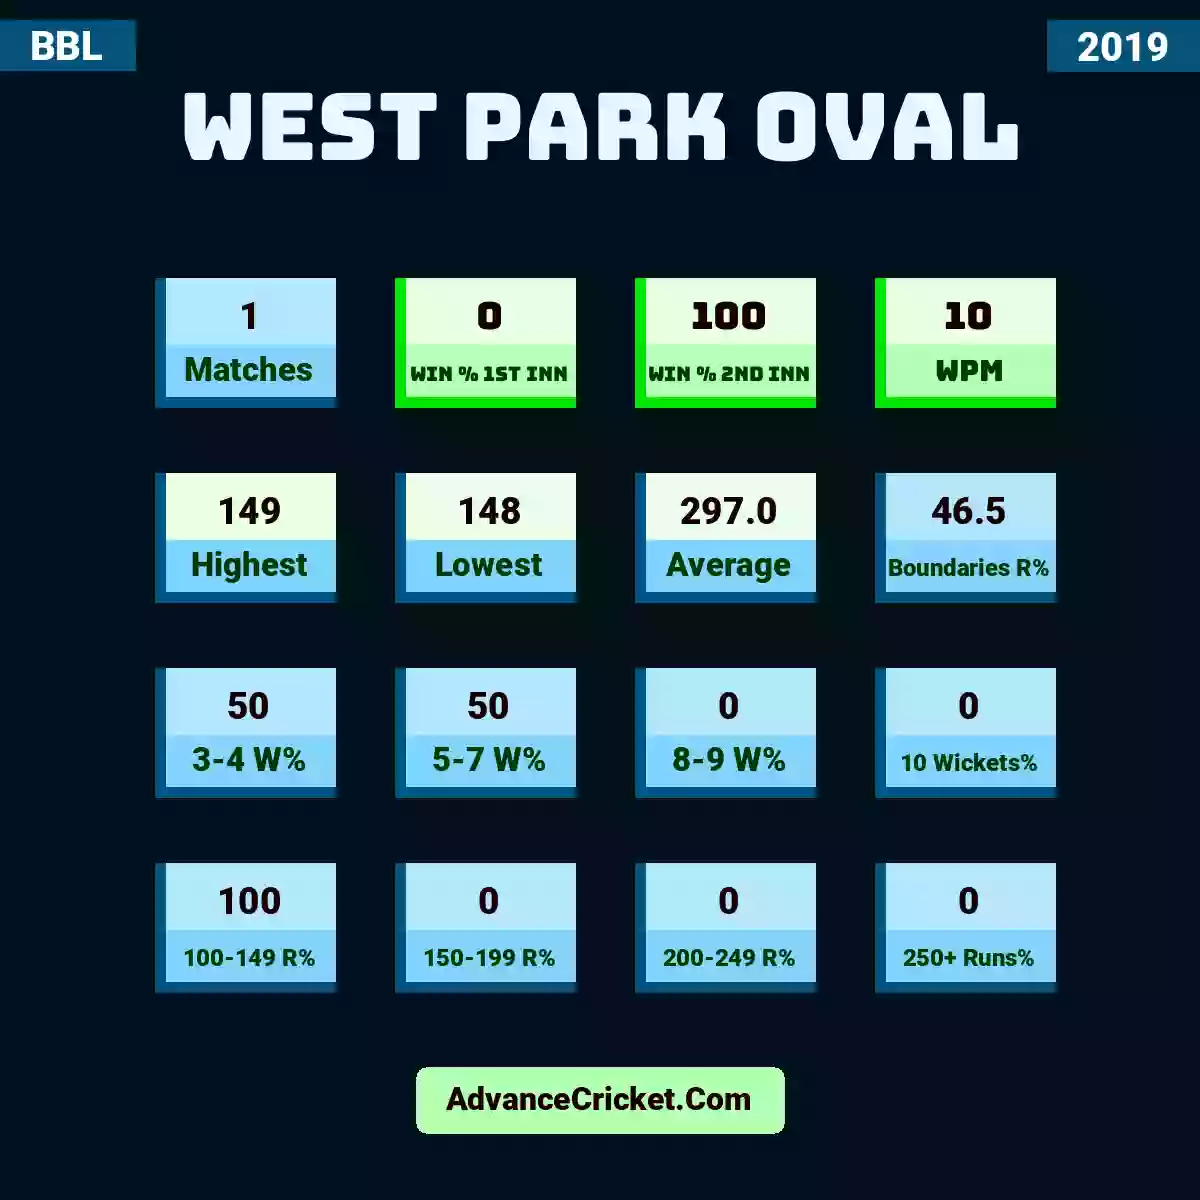 Image showing West Park Oval with Matches: 1, Win % 1st Inn: 0, Win % 2nd Inn: 100, WPM: 10, Highest: 149, Lowest: 148, Average: 297.0, Boundaries R%: 46.5, 3-4 W%: 50, 5-7 W%: 50, 8-9 W%: 0, 10 Wickets%: 0, 100-149 R%: 100, 150-199 R%: 0, 200-249 R%: 0, 250+ Runs%: 0.